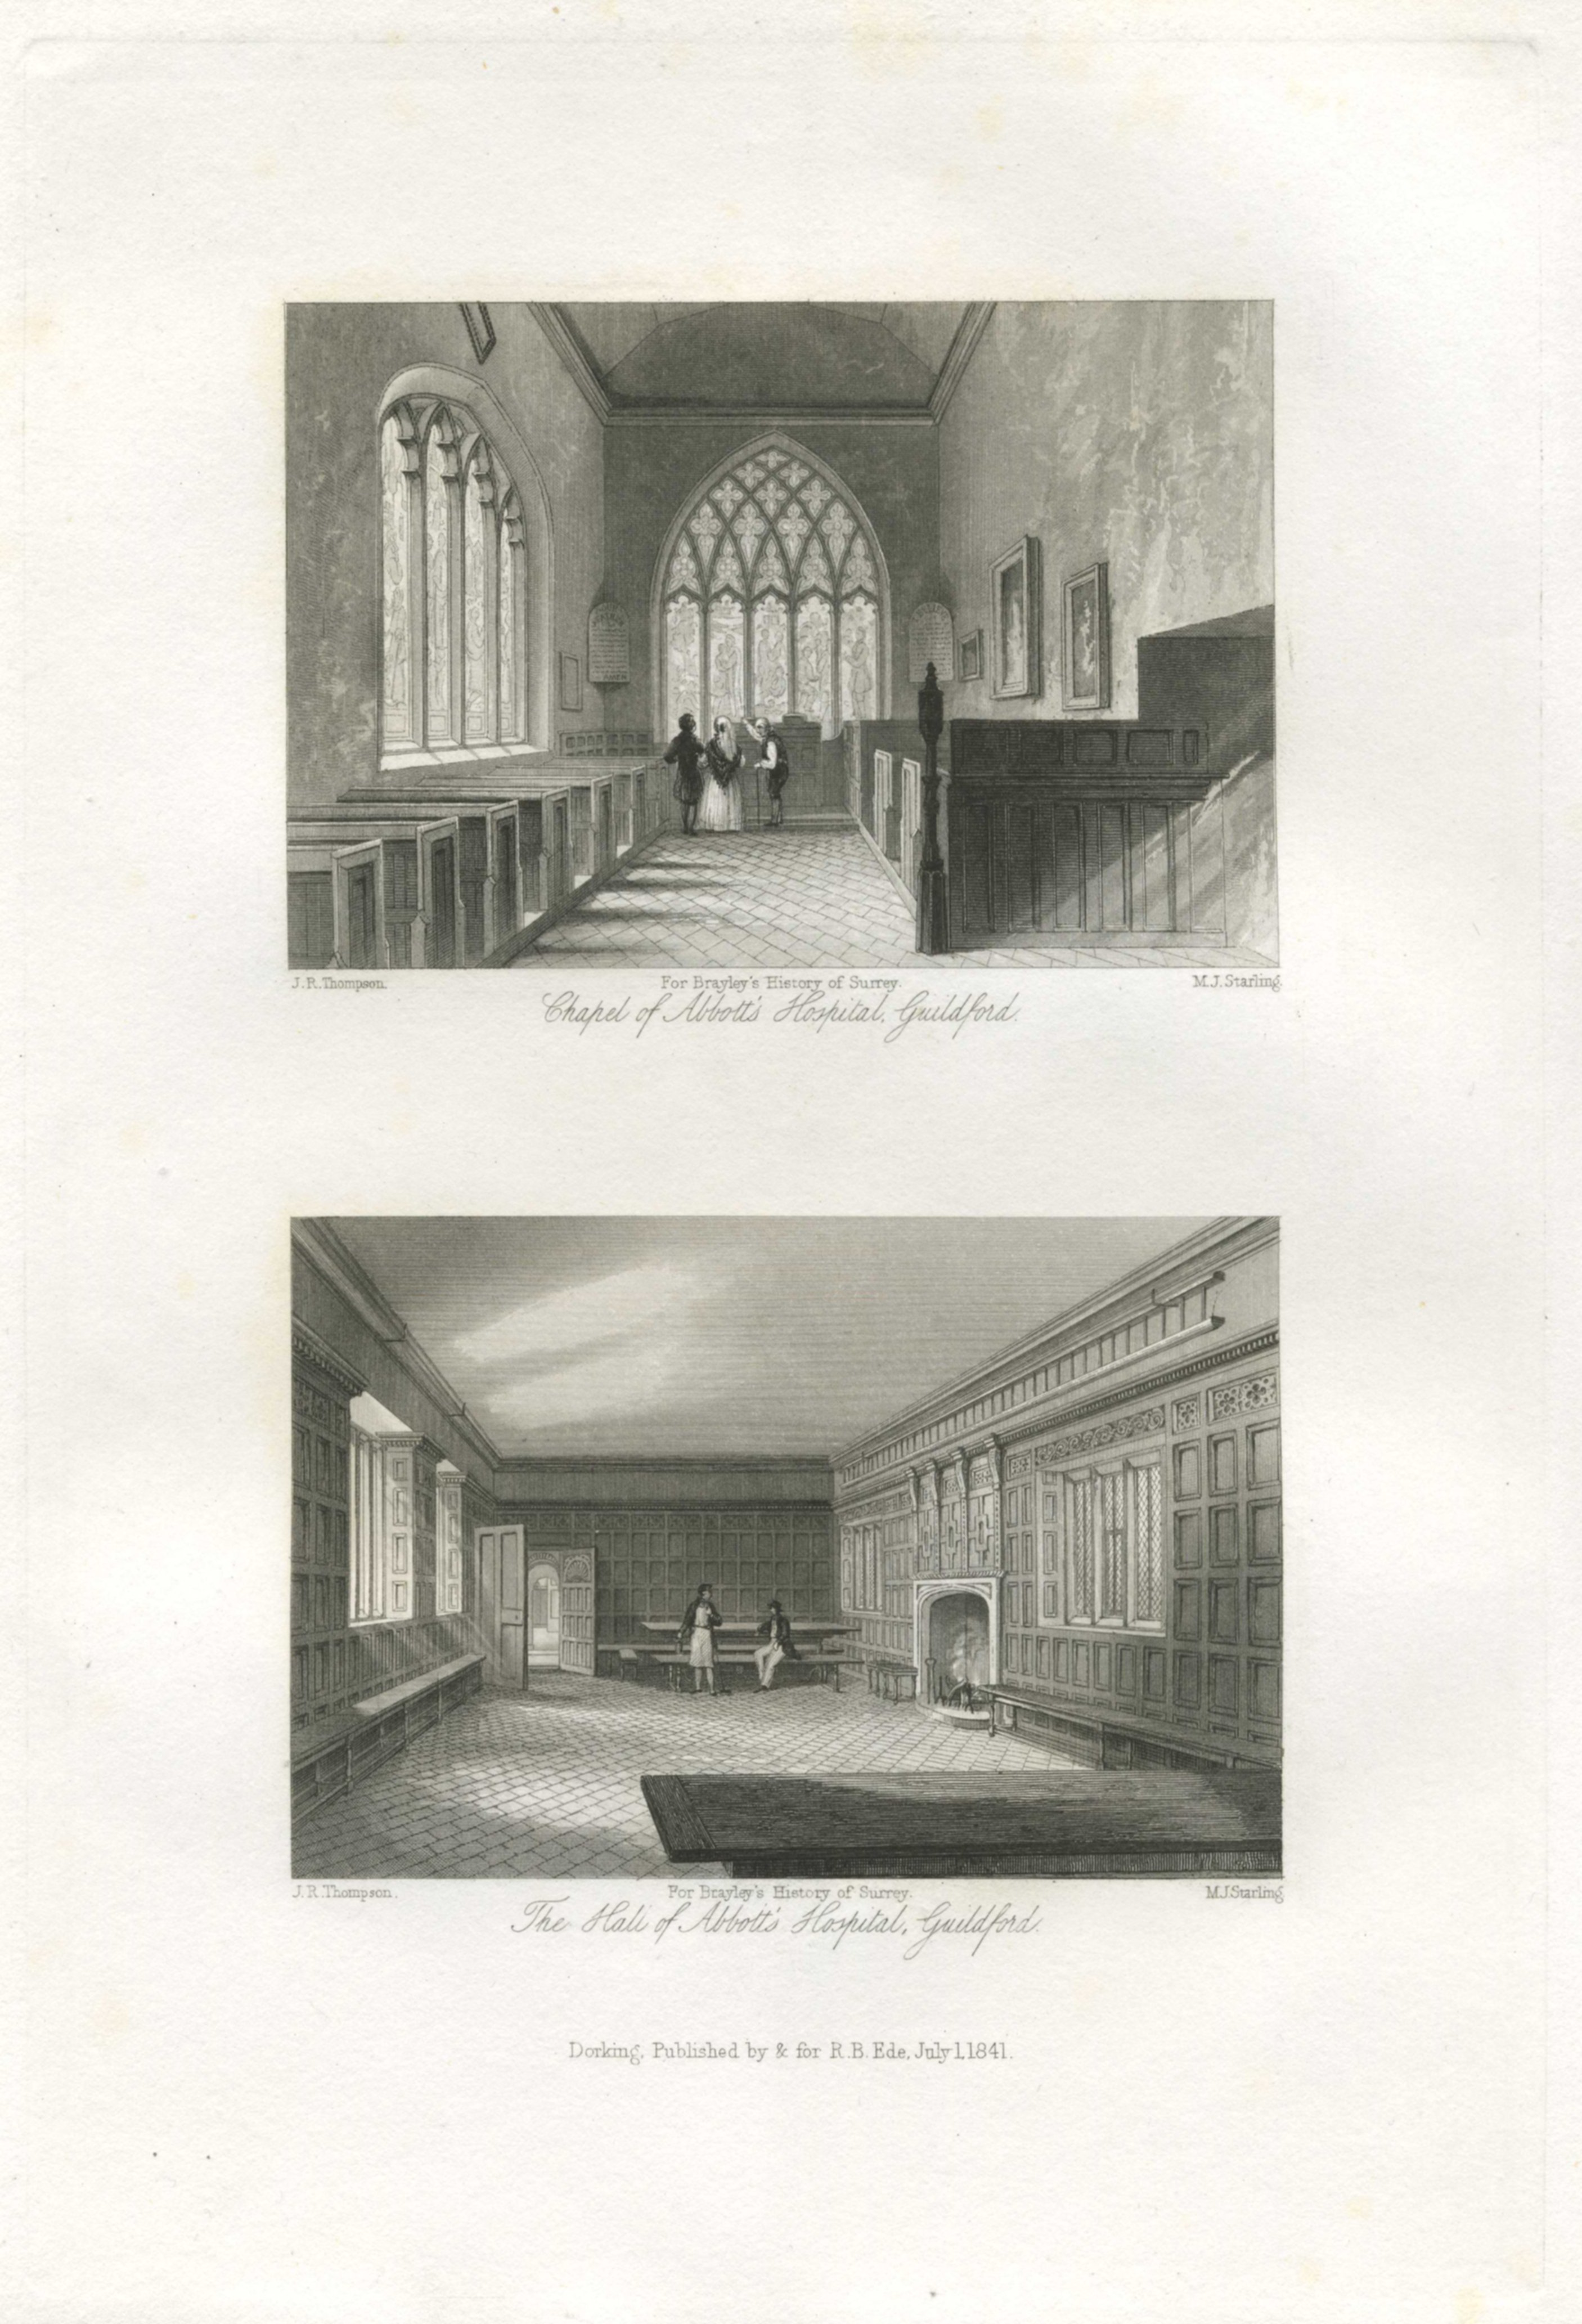 Surrey, Guildford, Abbot's Hospital, 2 views, 1841